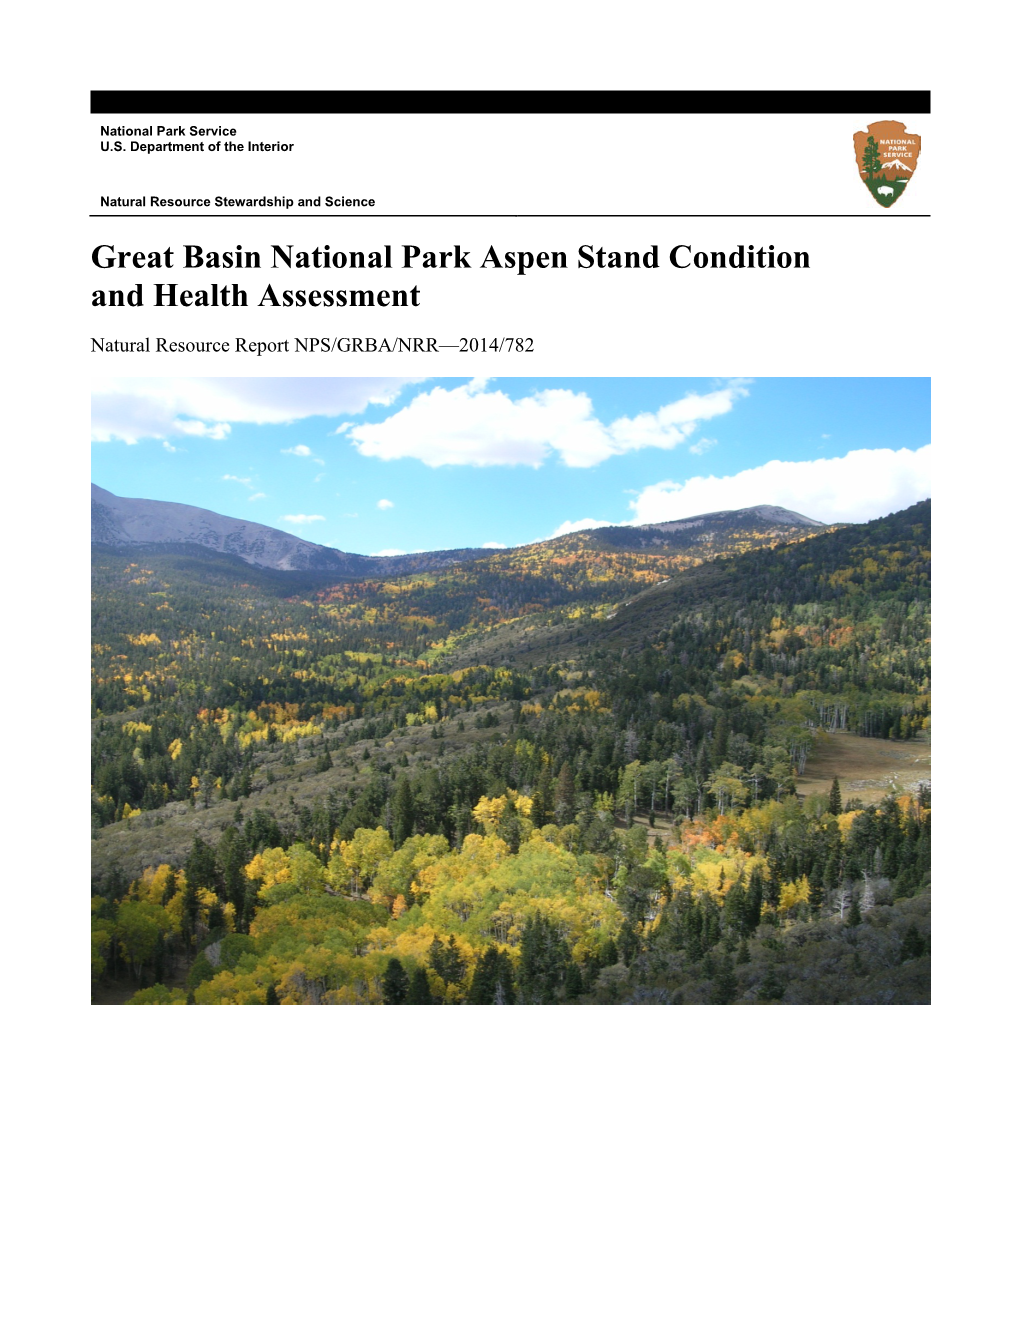 Great Basin National Park Aspen Stand Condition and Health Assessment